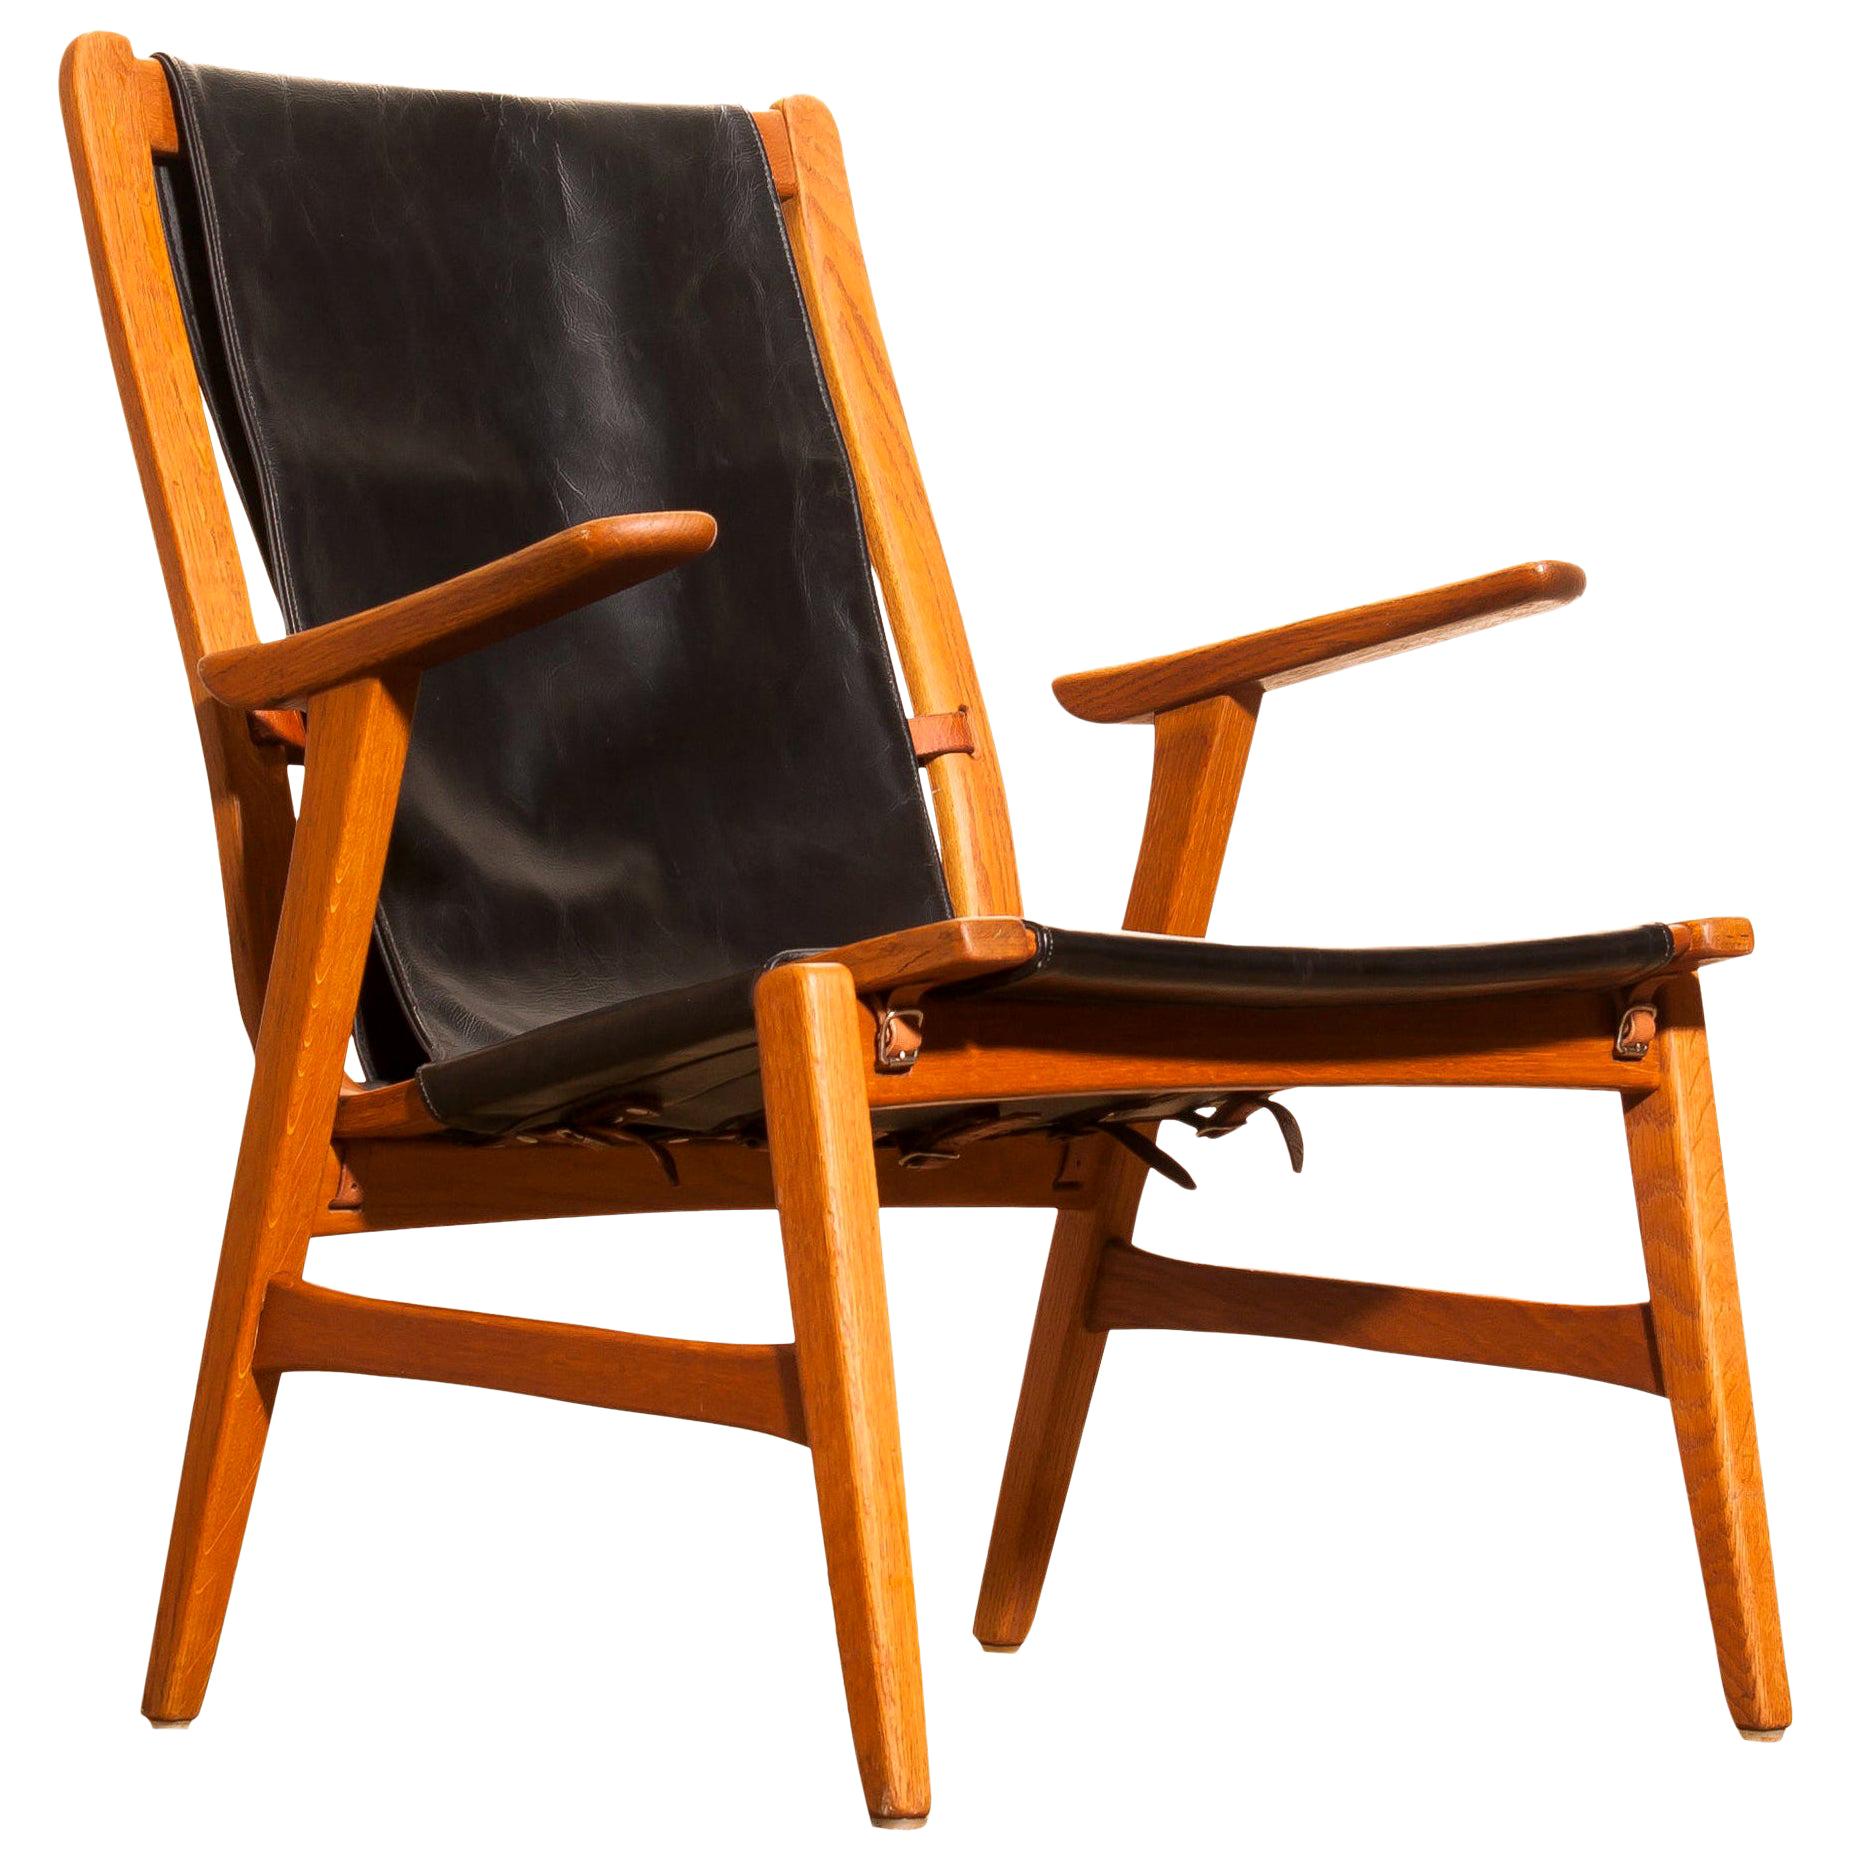 1950s, Oak and Leatherette Hunting Lounge Chair 'Ulrika' by Östen Kristiansson